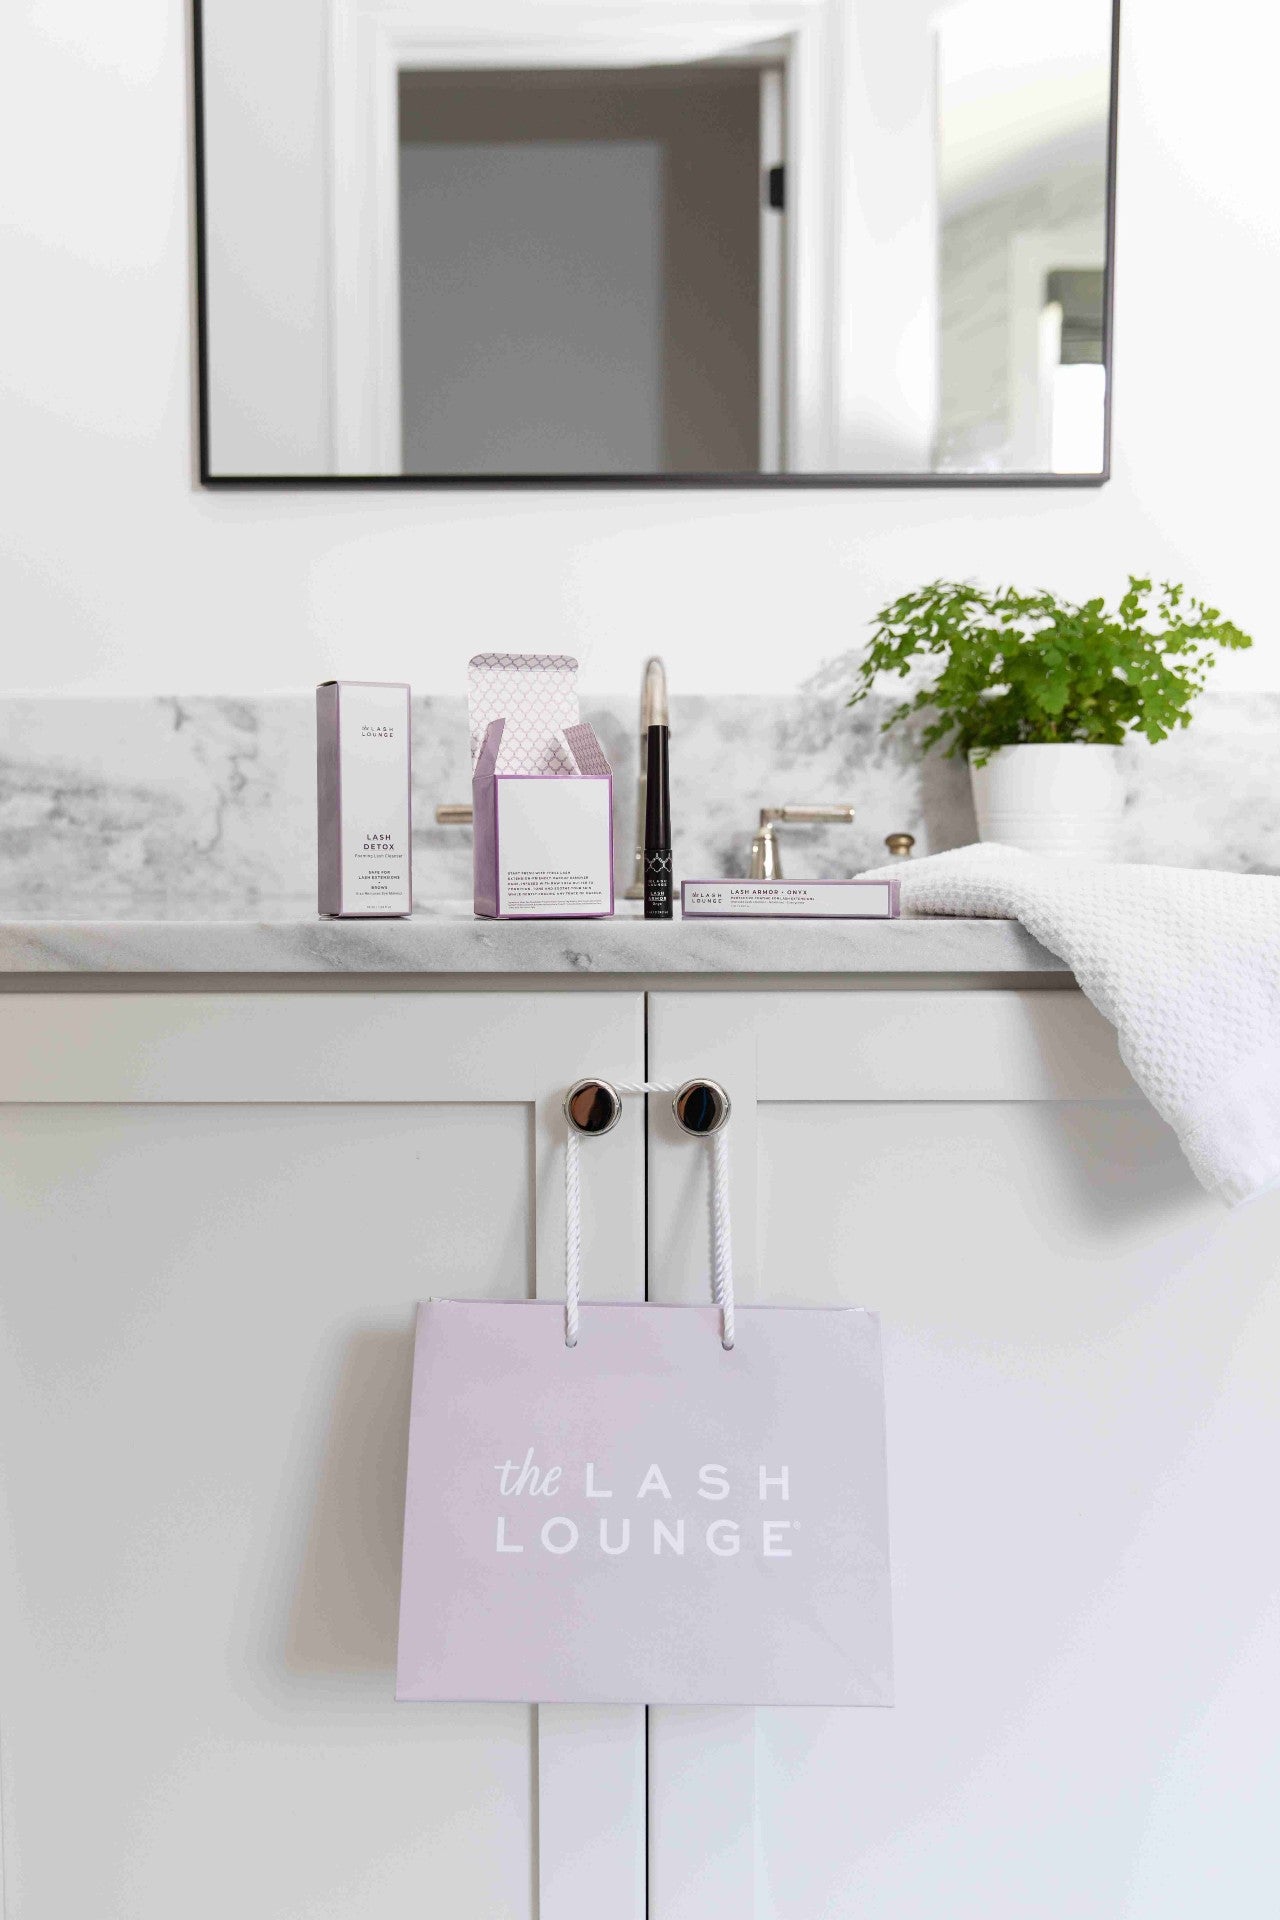 a bathroom counter with Lash Lounge products and bag hanging from cabinet